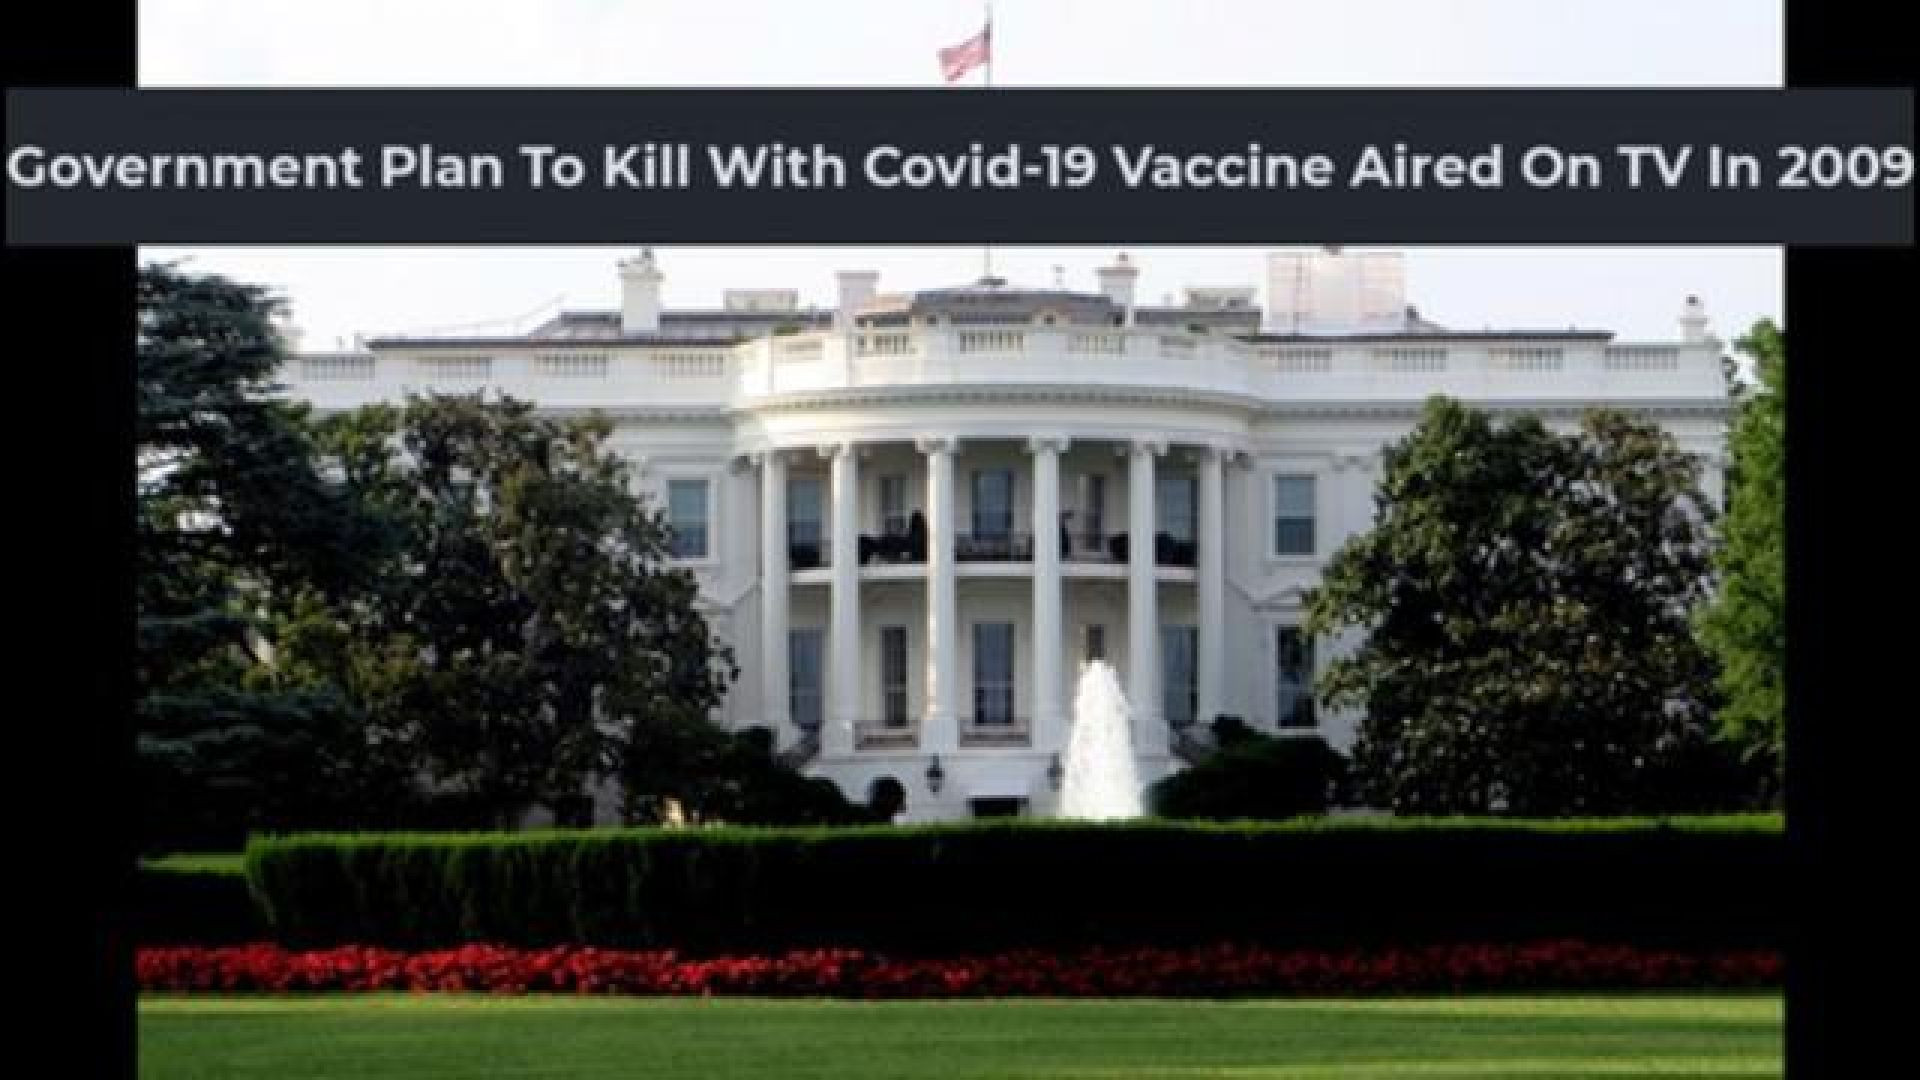 THE GOVERNMENTS PLAN TO KILL WITH THE COVID-19 VACCINE AIRED ON TV IN 2009